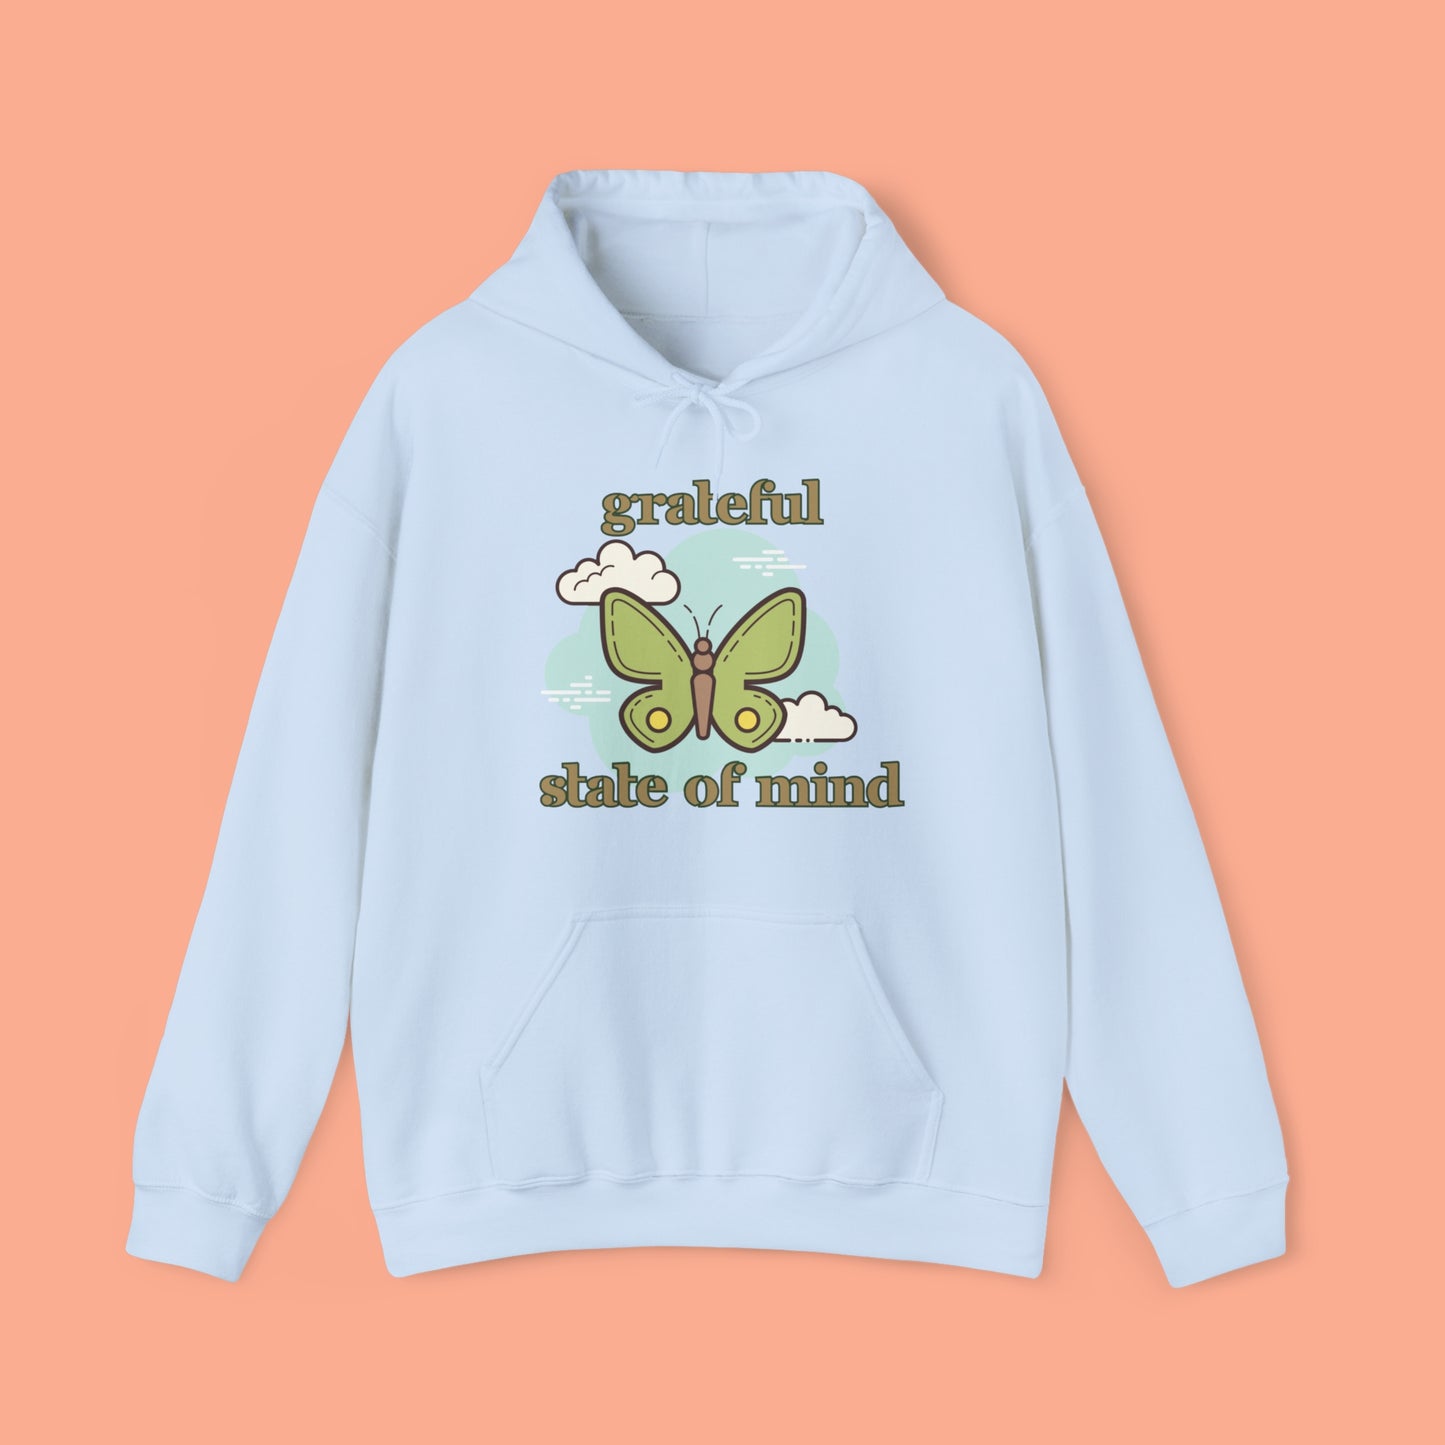 Grateful state of mind around a simple butterfly design on this Unisex Heavy Blend™ Hooded Sweatshirt